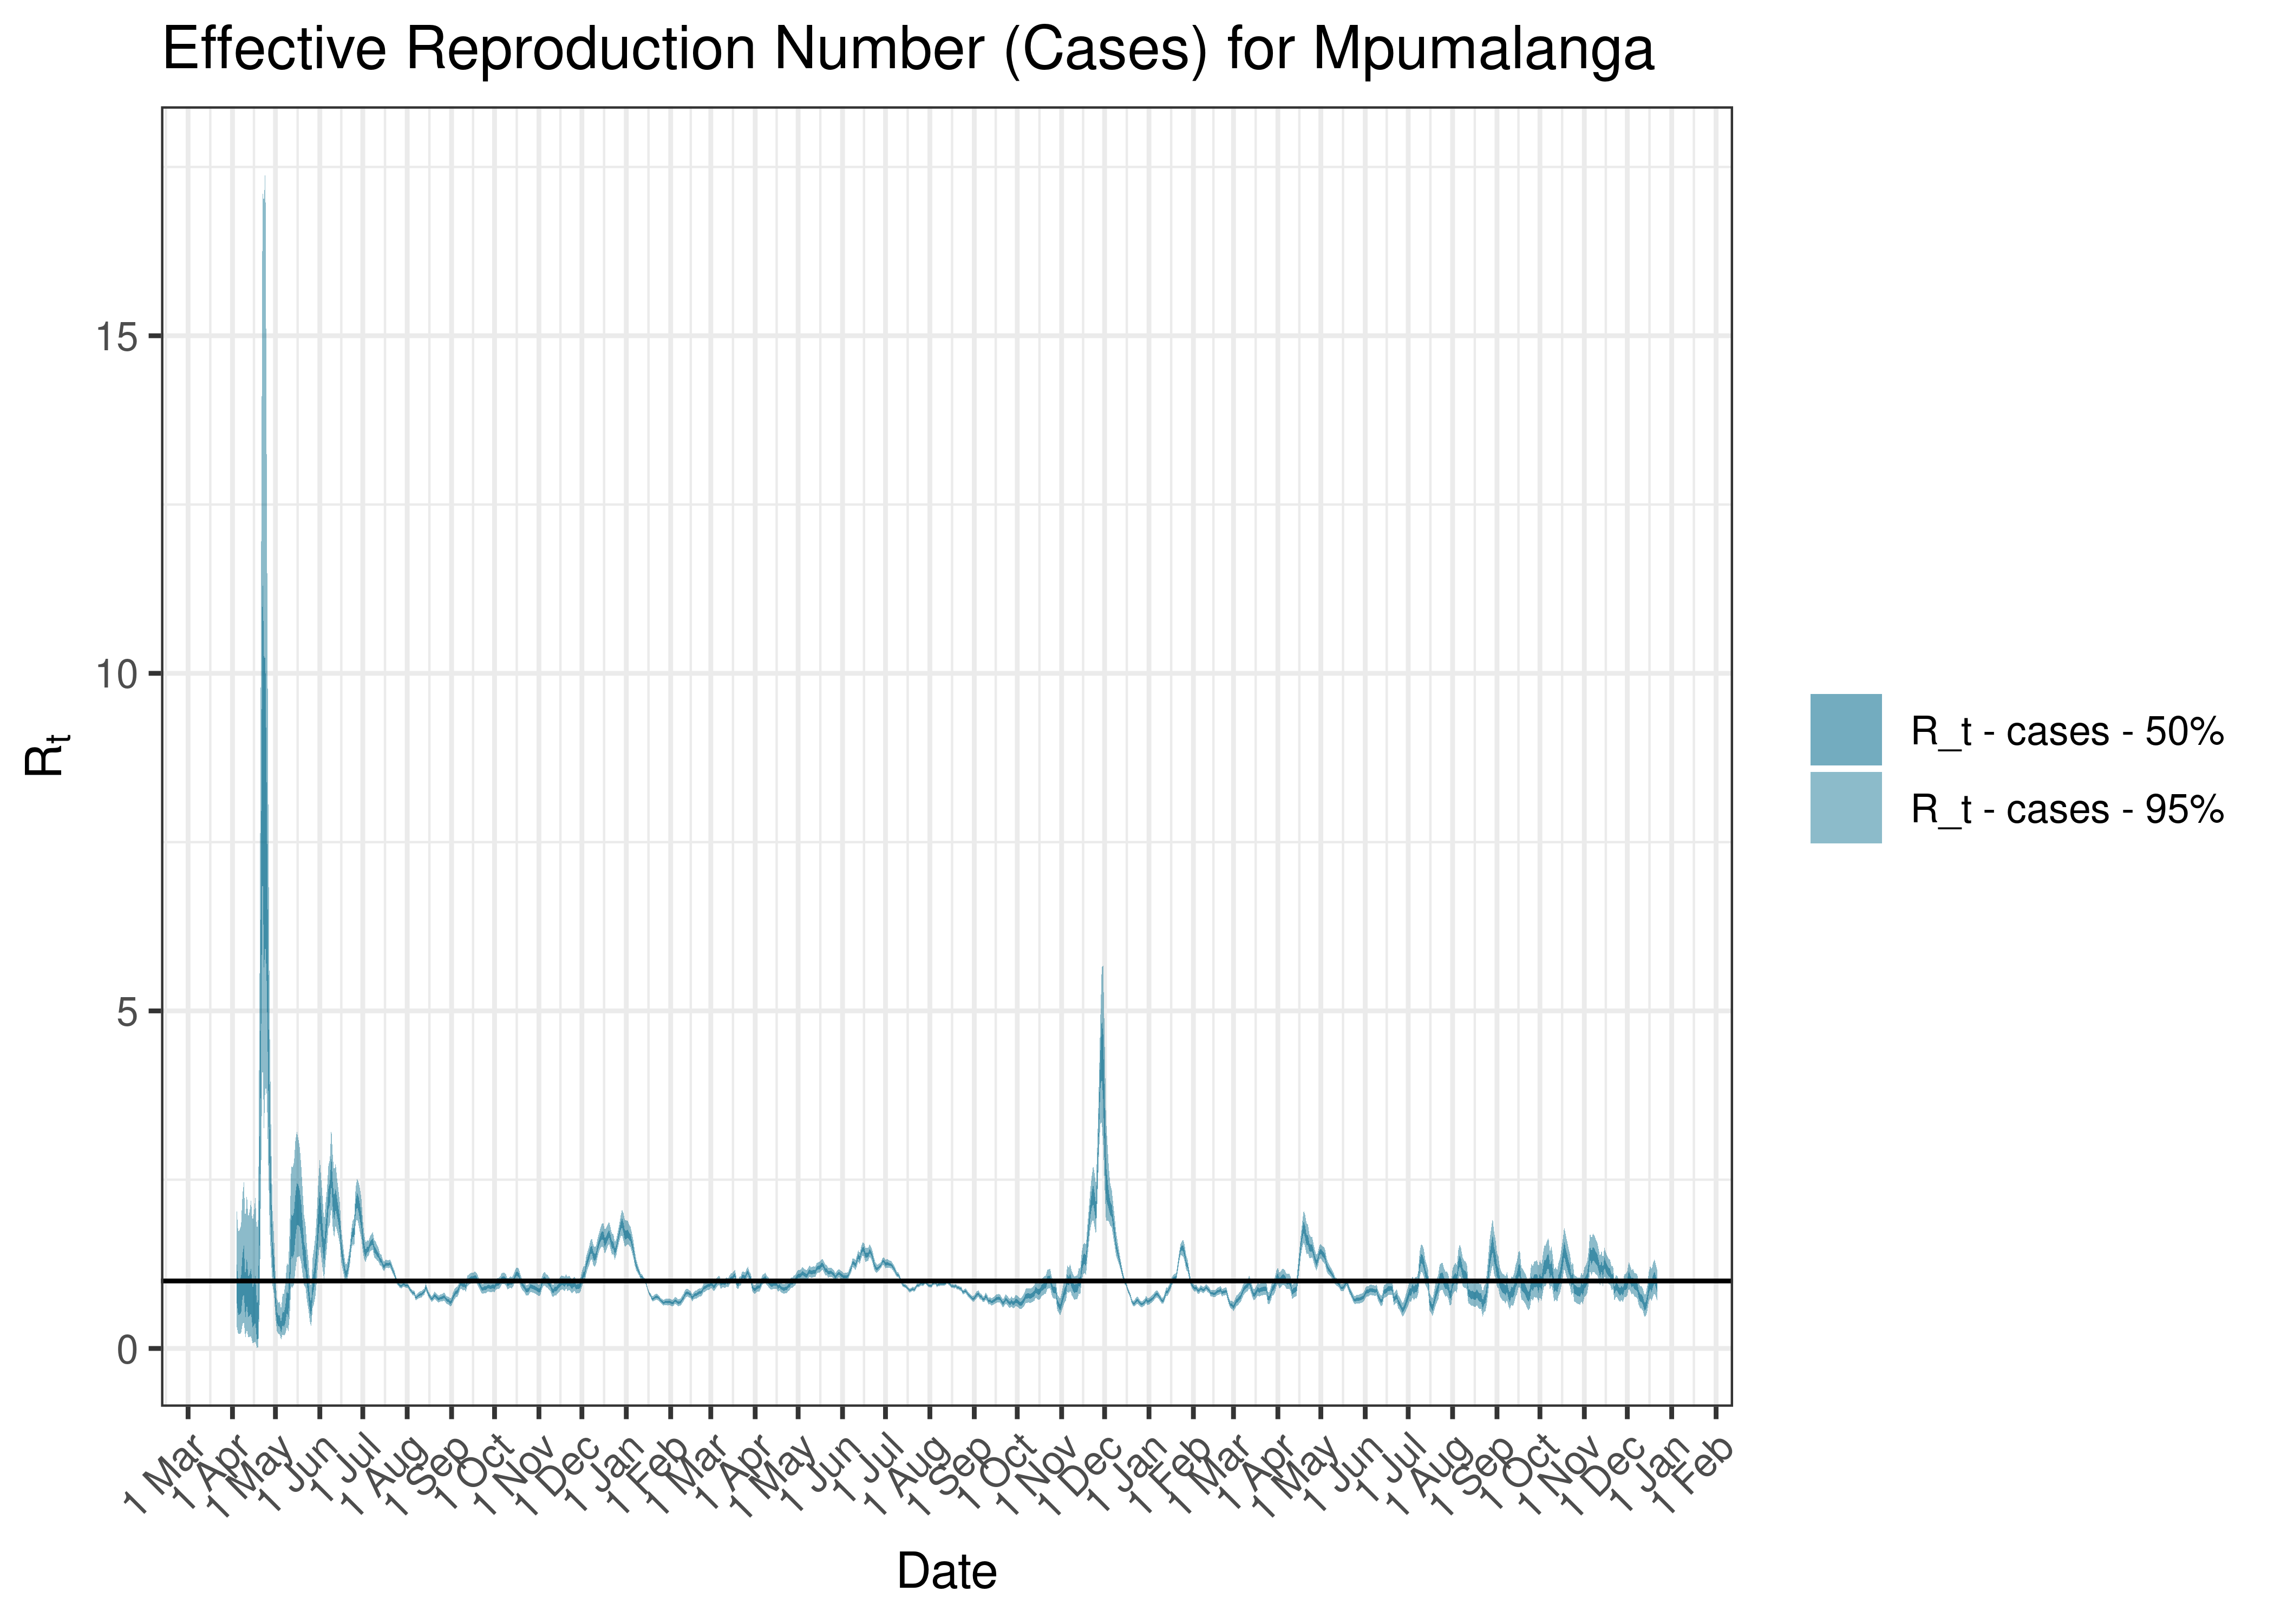 Estimated Effective Reproduction Number Based on Cases for Mpumalanga since 1 April 2020